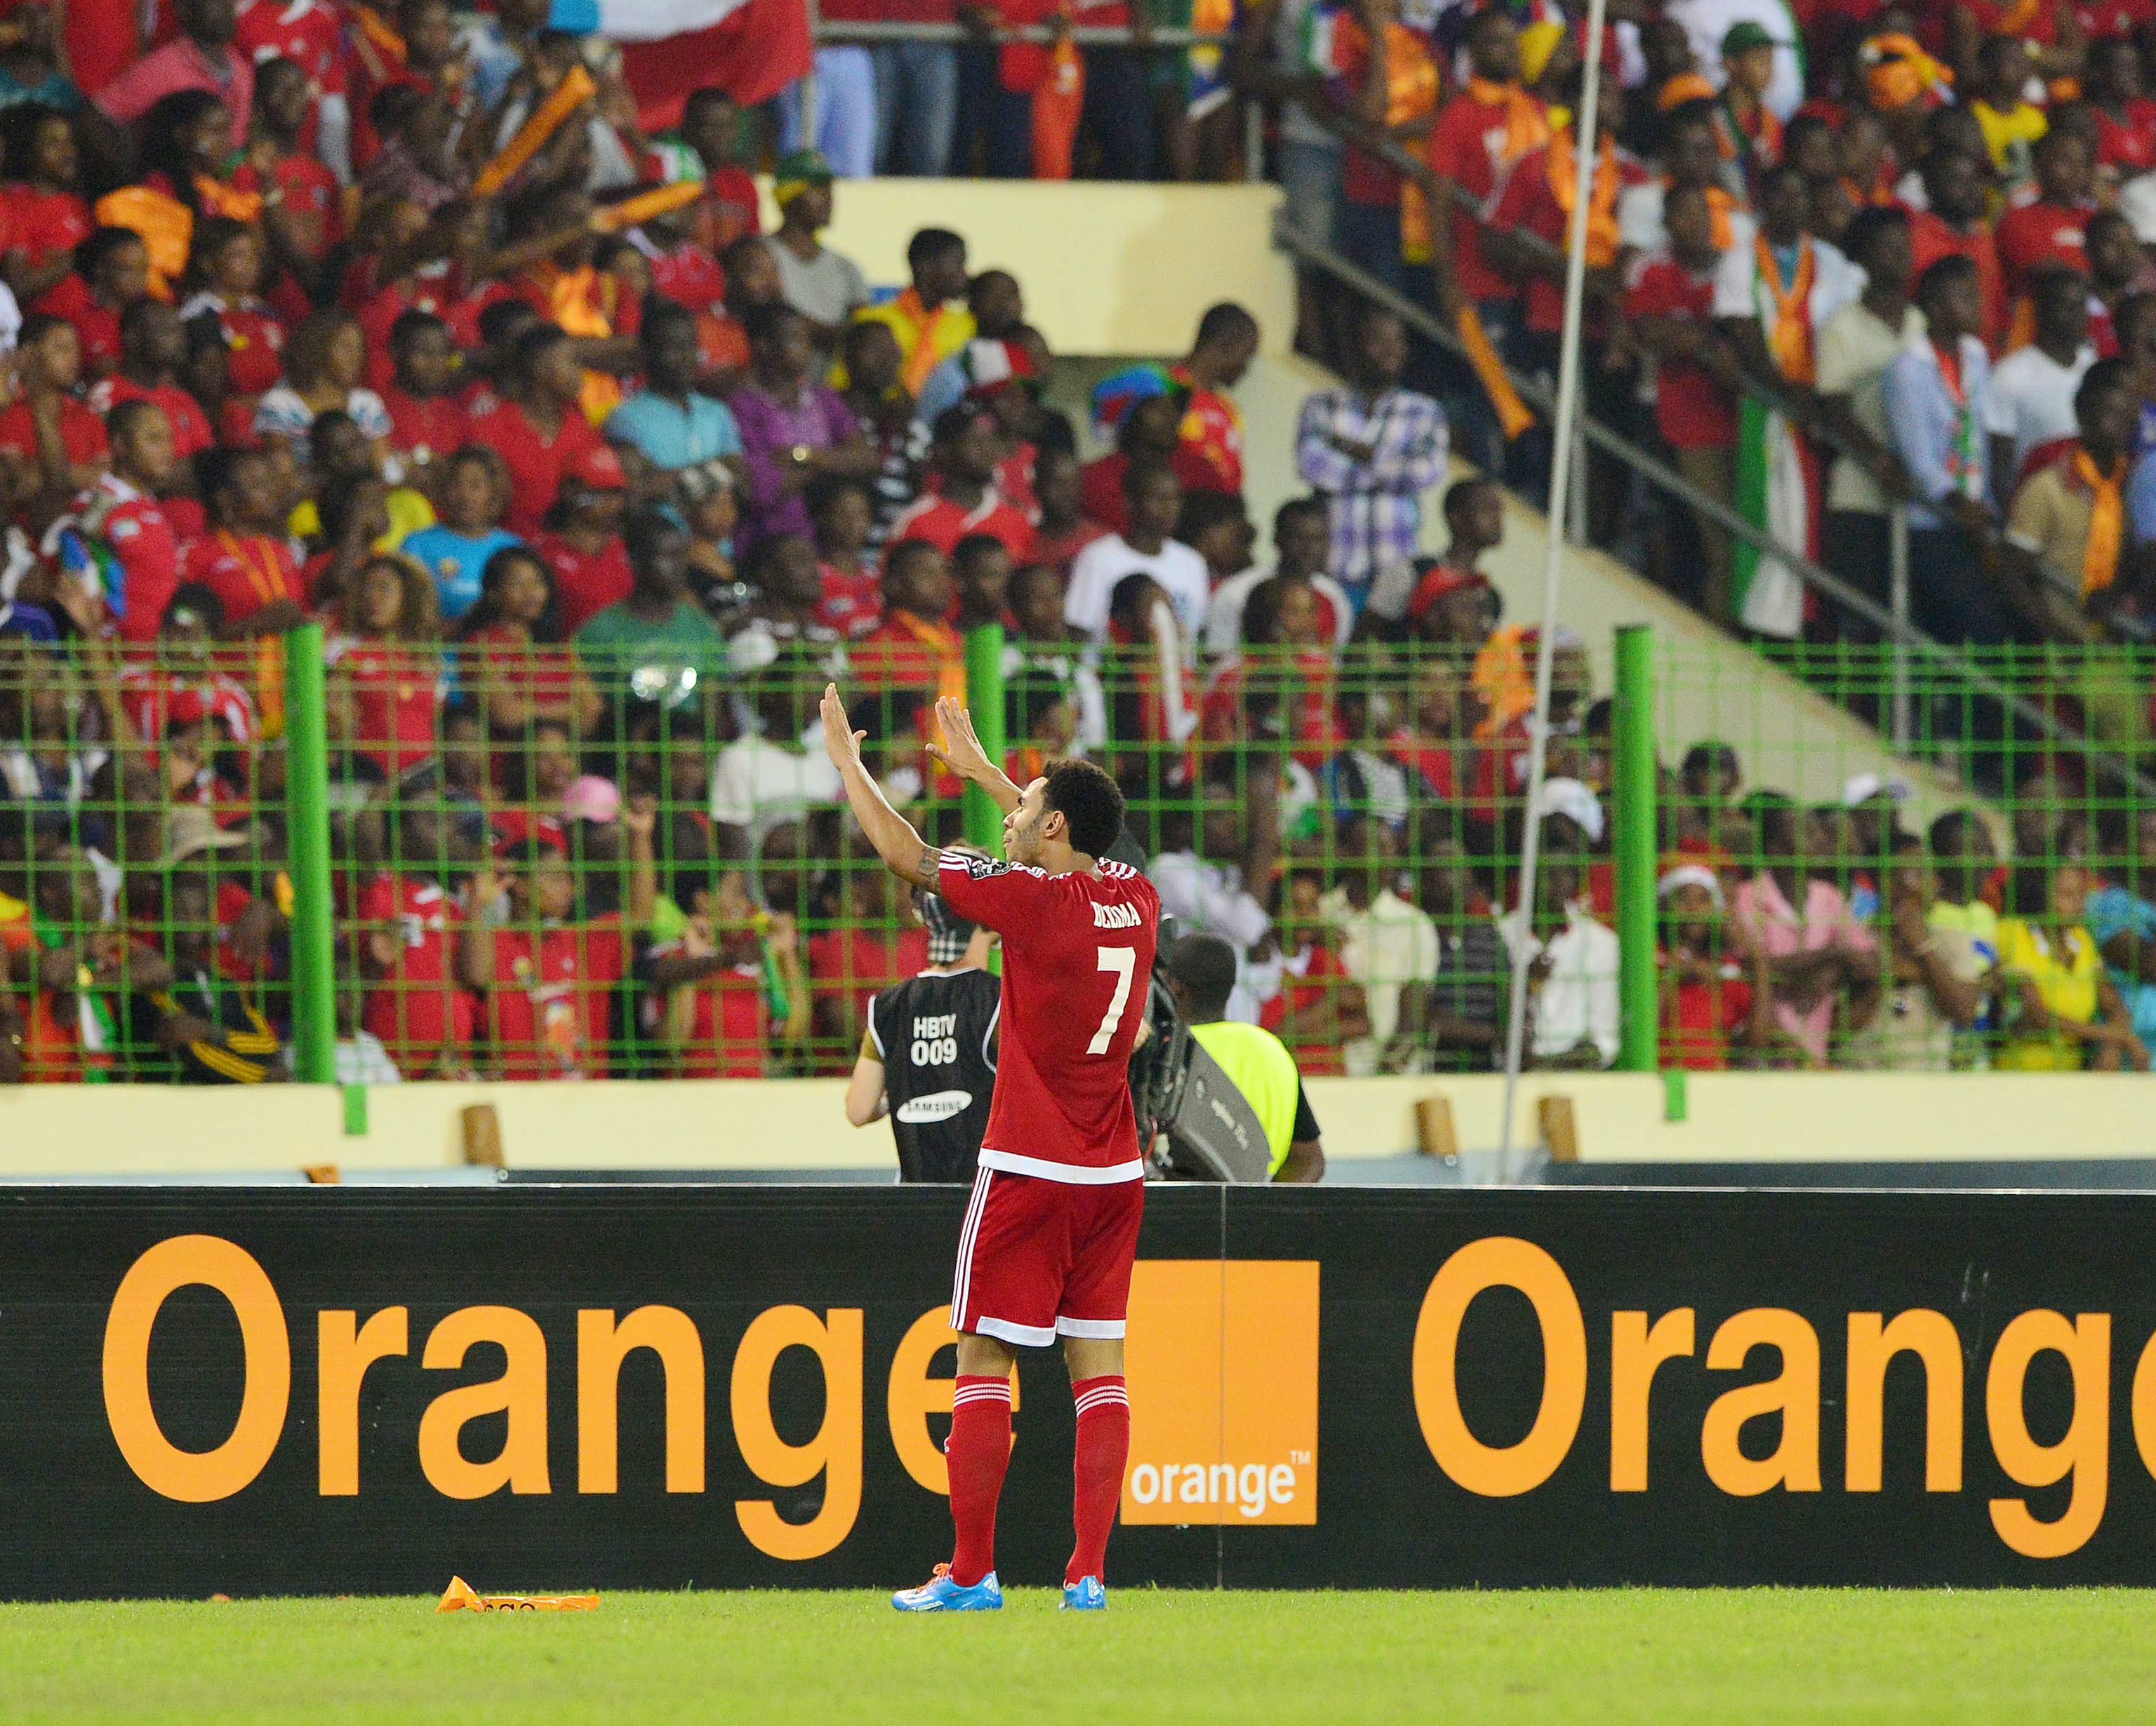 Reuban Belima of Equatorial Guinea pleads for calm from the crowd during a stormy semi-final encounter between Ghana and Equatorial Guinea during a sporadically violent Africa Cup of Nations. Photo: EPA